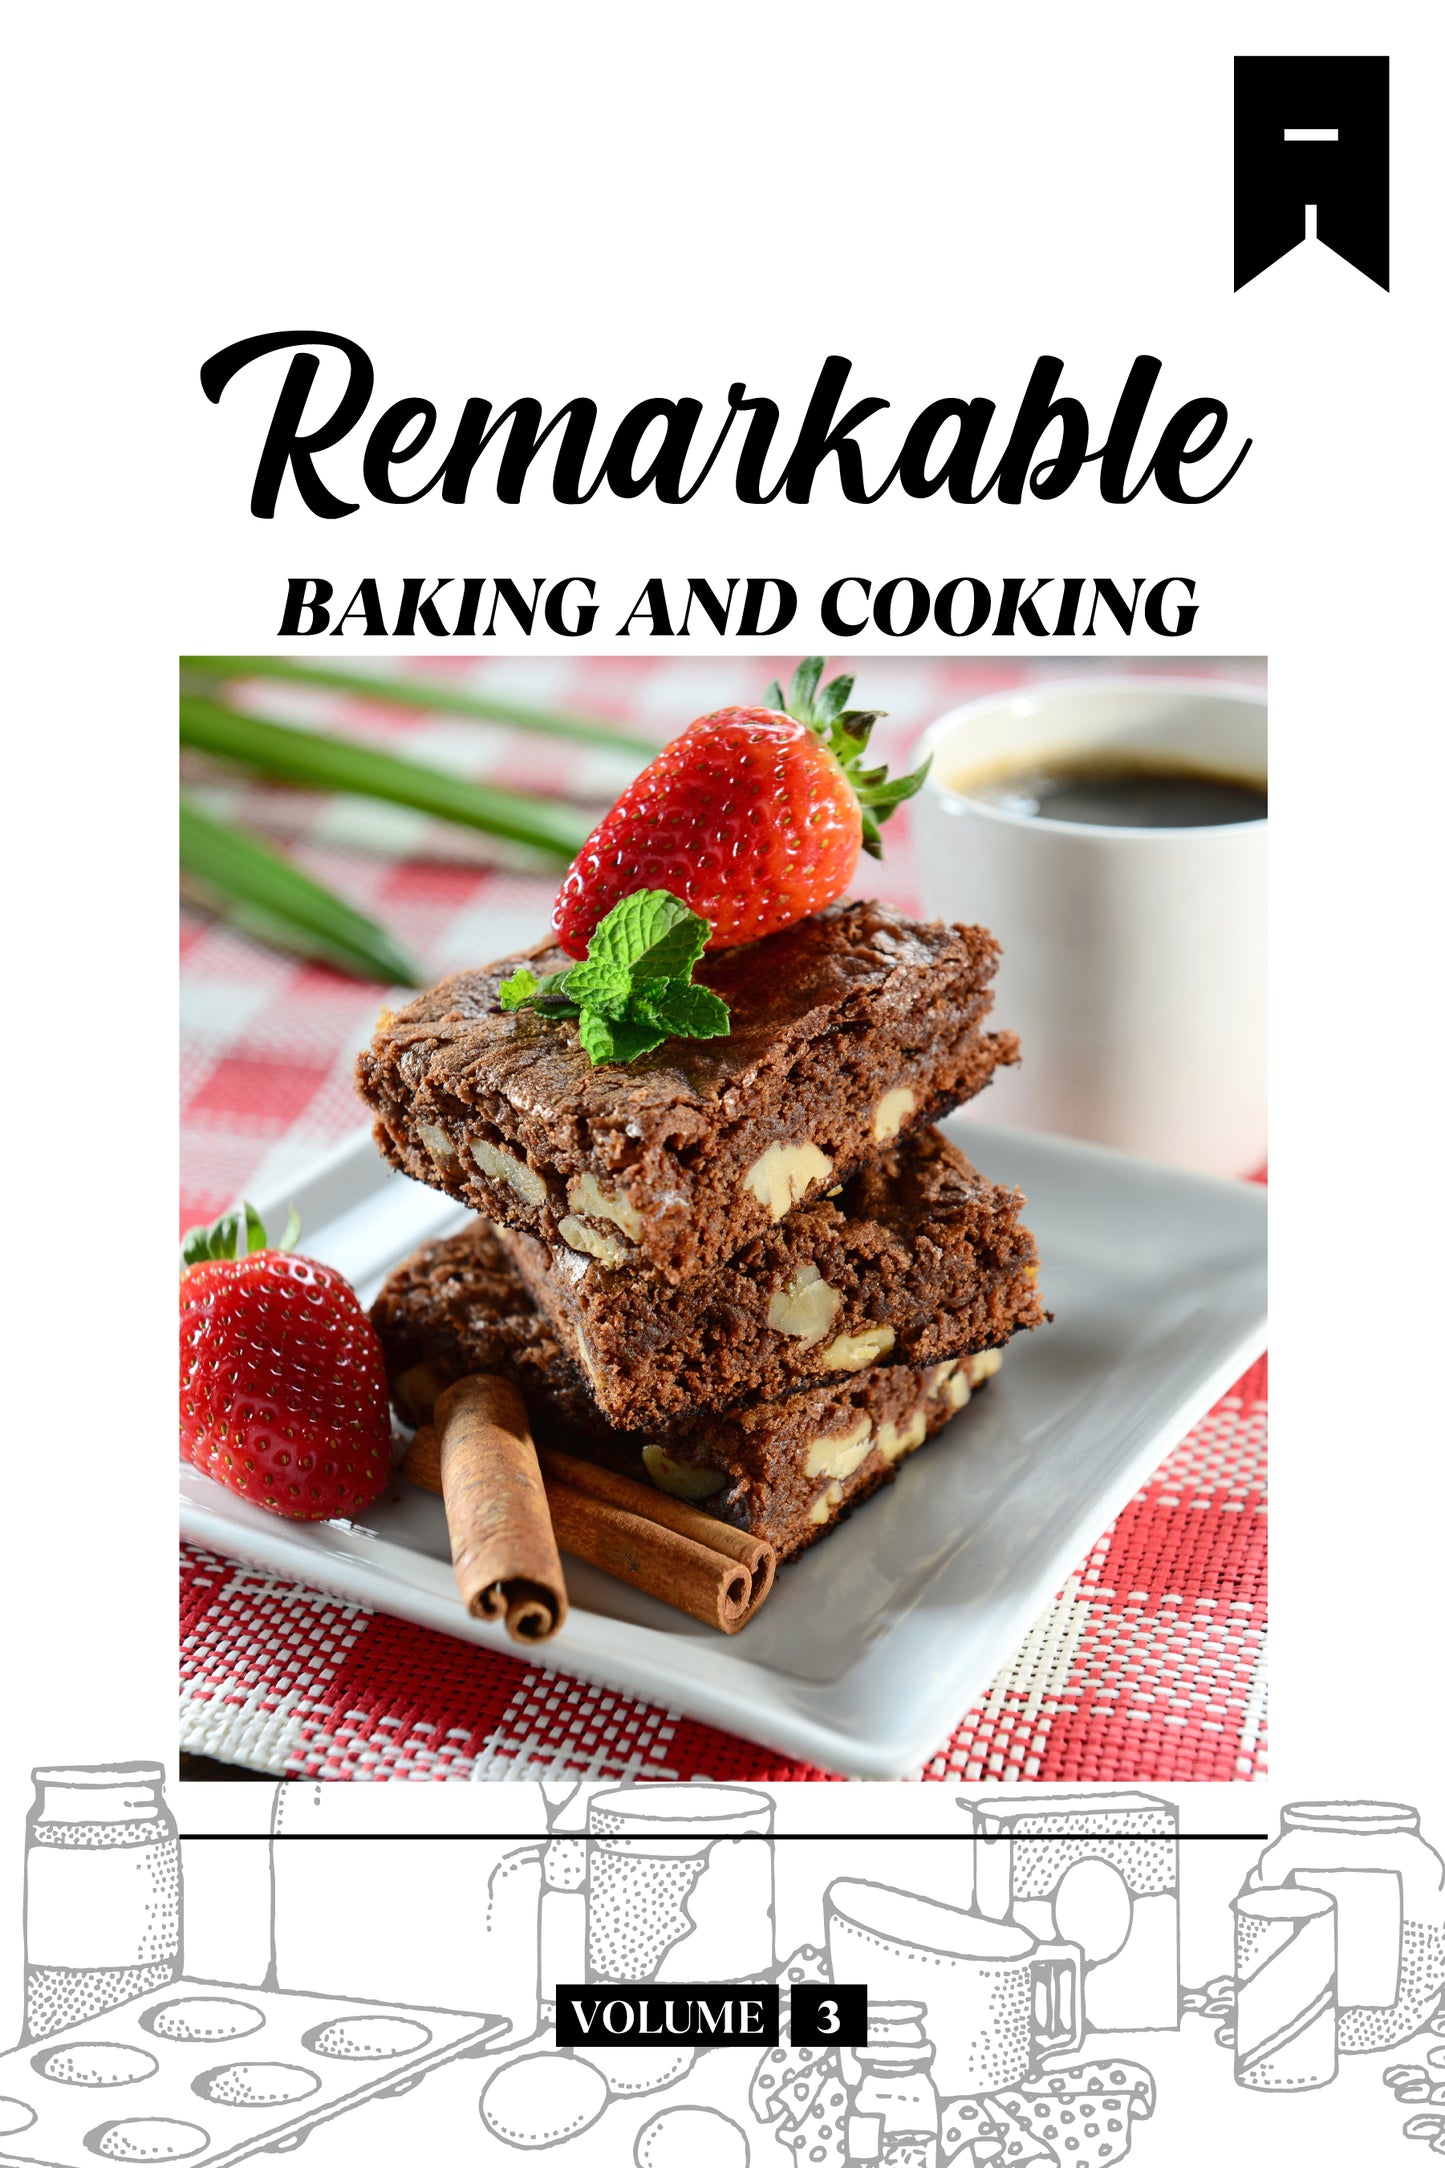 Remarkable Baking (Volume 3) - Physical Book